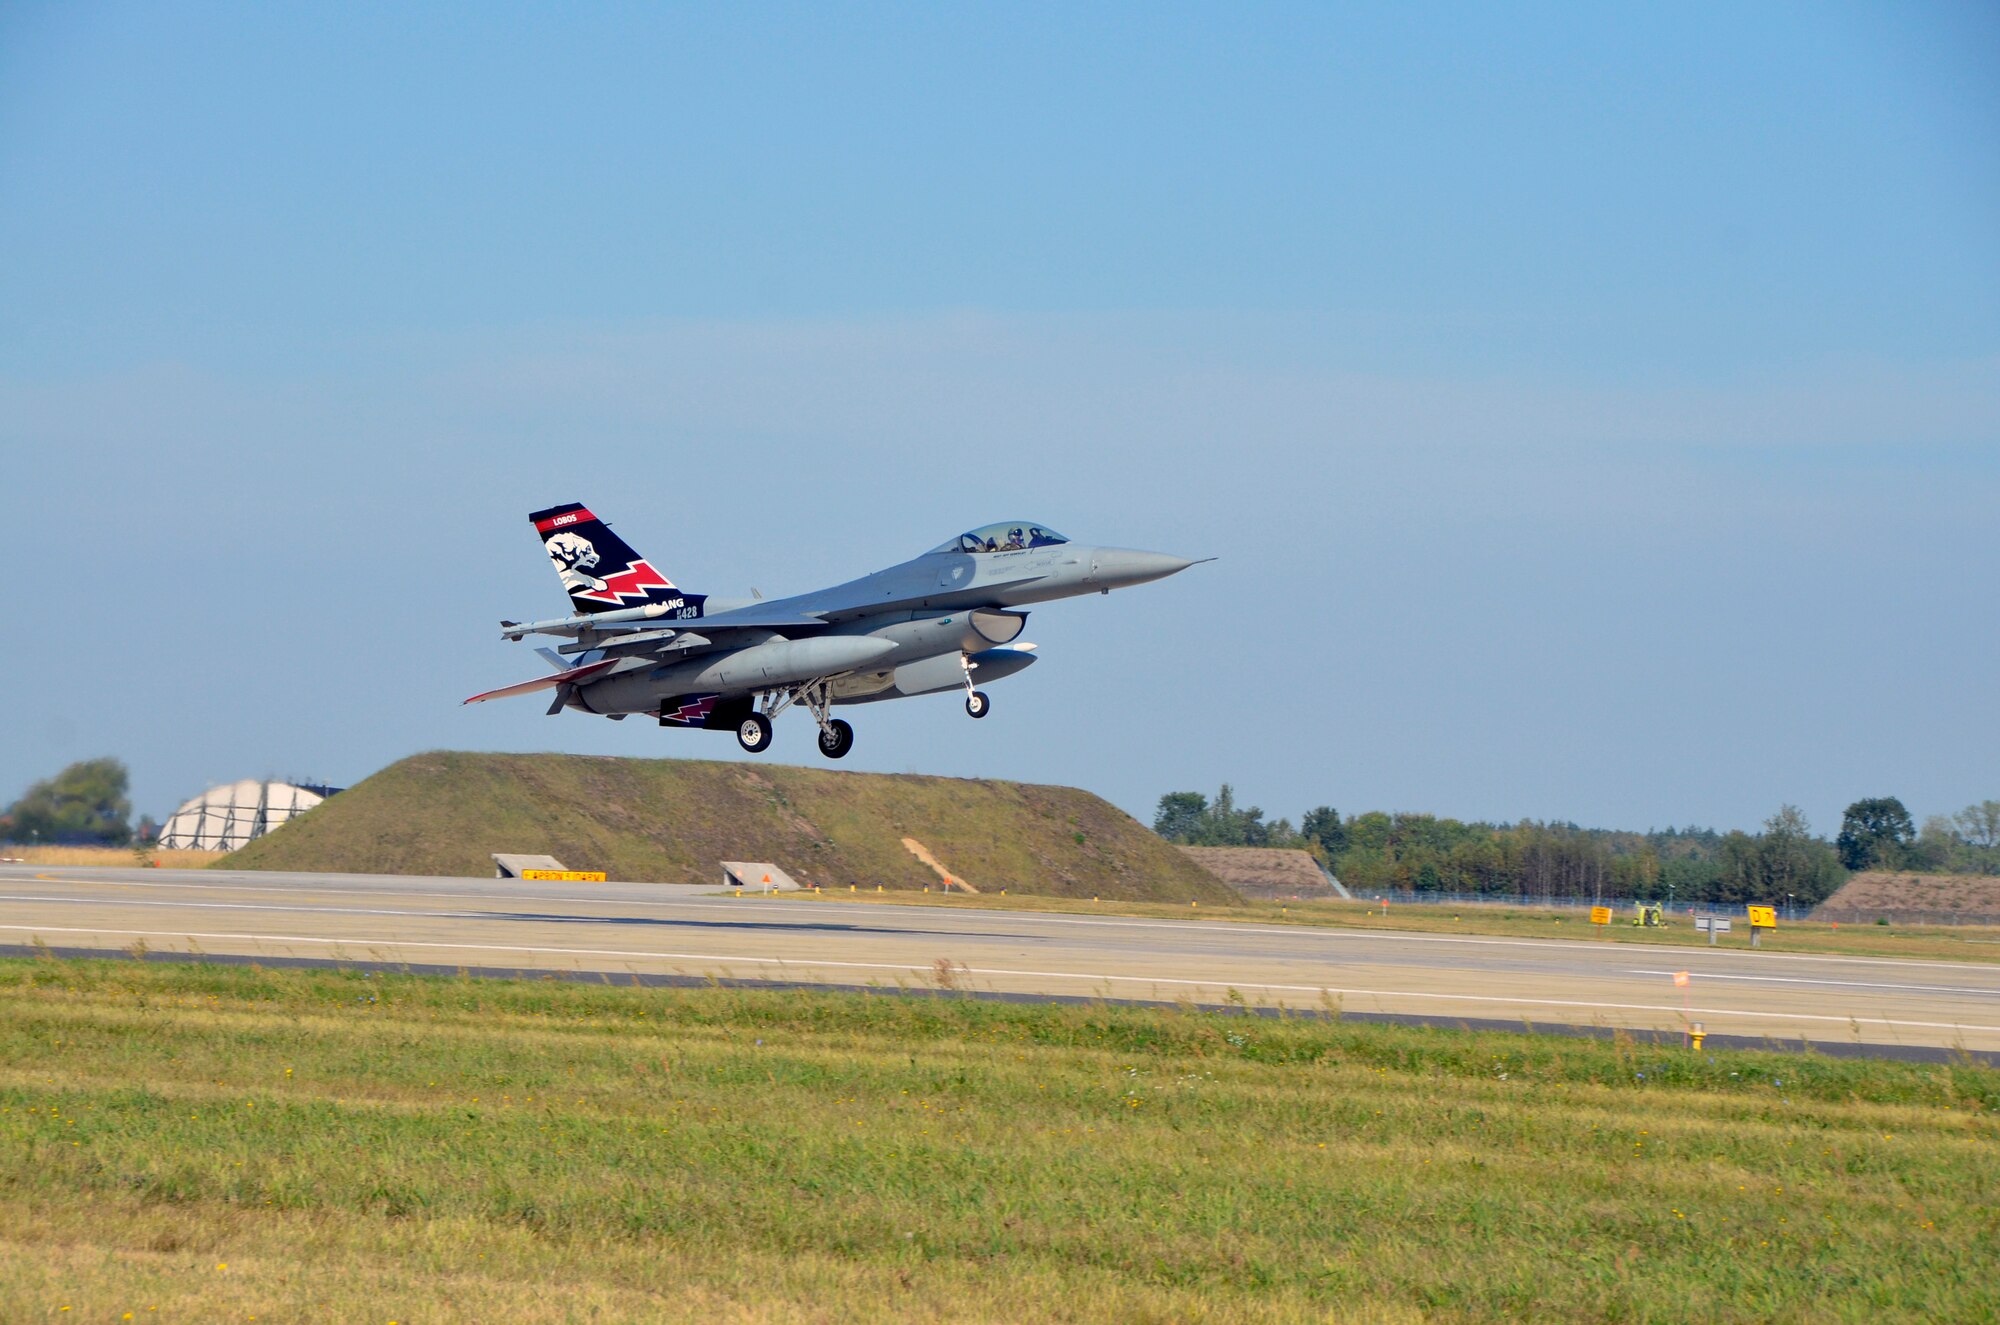 An F-16 Fighting Falcon from the South Dakota Air National Guard comes in for a landing at Lask Air Base, Poland, Sept. 19, 2016. The 114th Fighter Wing deployed more than 100 personnel in support of Aviation Detachment 16-4, a bilateral training exercise between the U.S. and Polish forces. The 114 FW was able to train alongside Polish allies in a variety of missions to include, close air support, air to air and air to ground. (U.S. Air National Guard photo by Capt. Amy Rittberger)